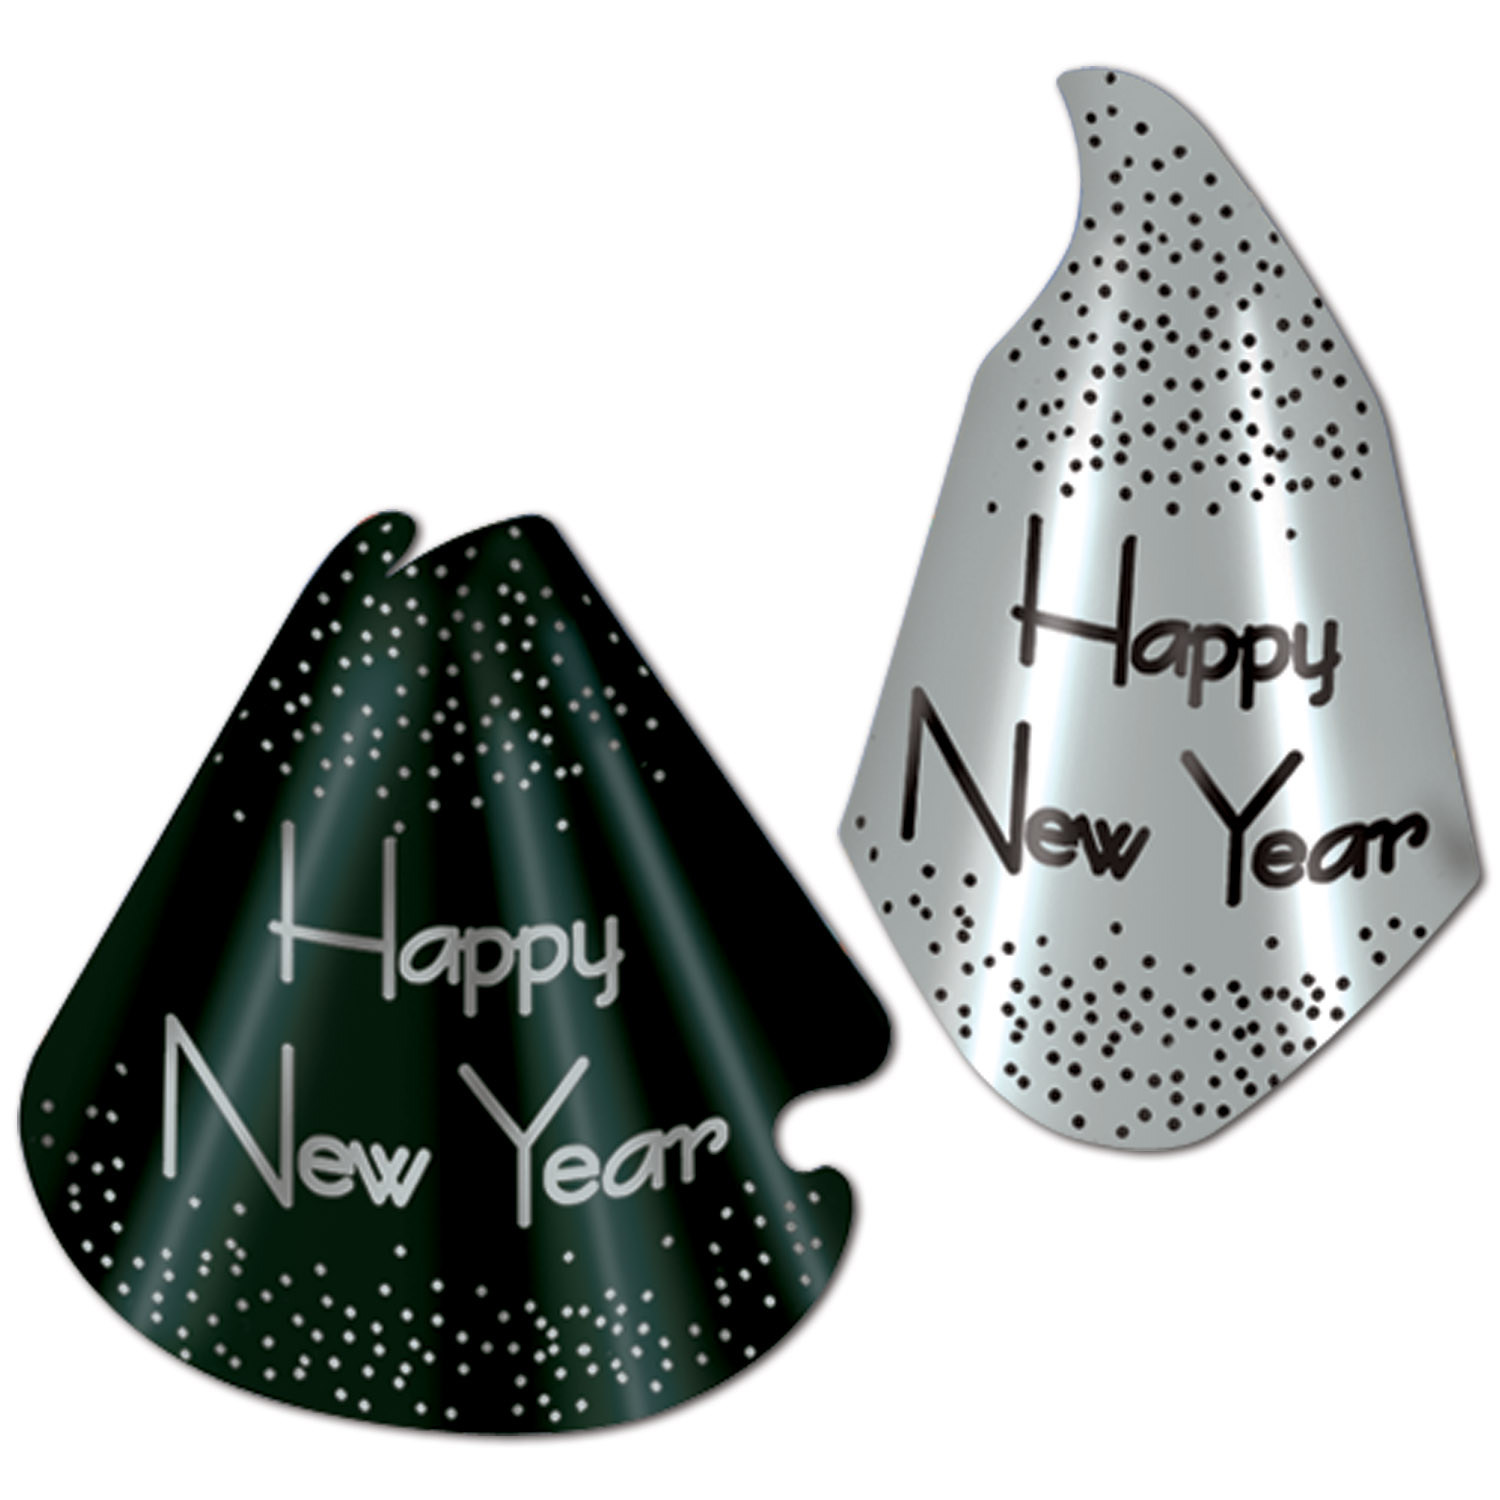 Traditional party hat with either a black or silver back fround and confettin accents with the words "Happy New Year".